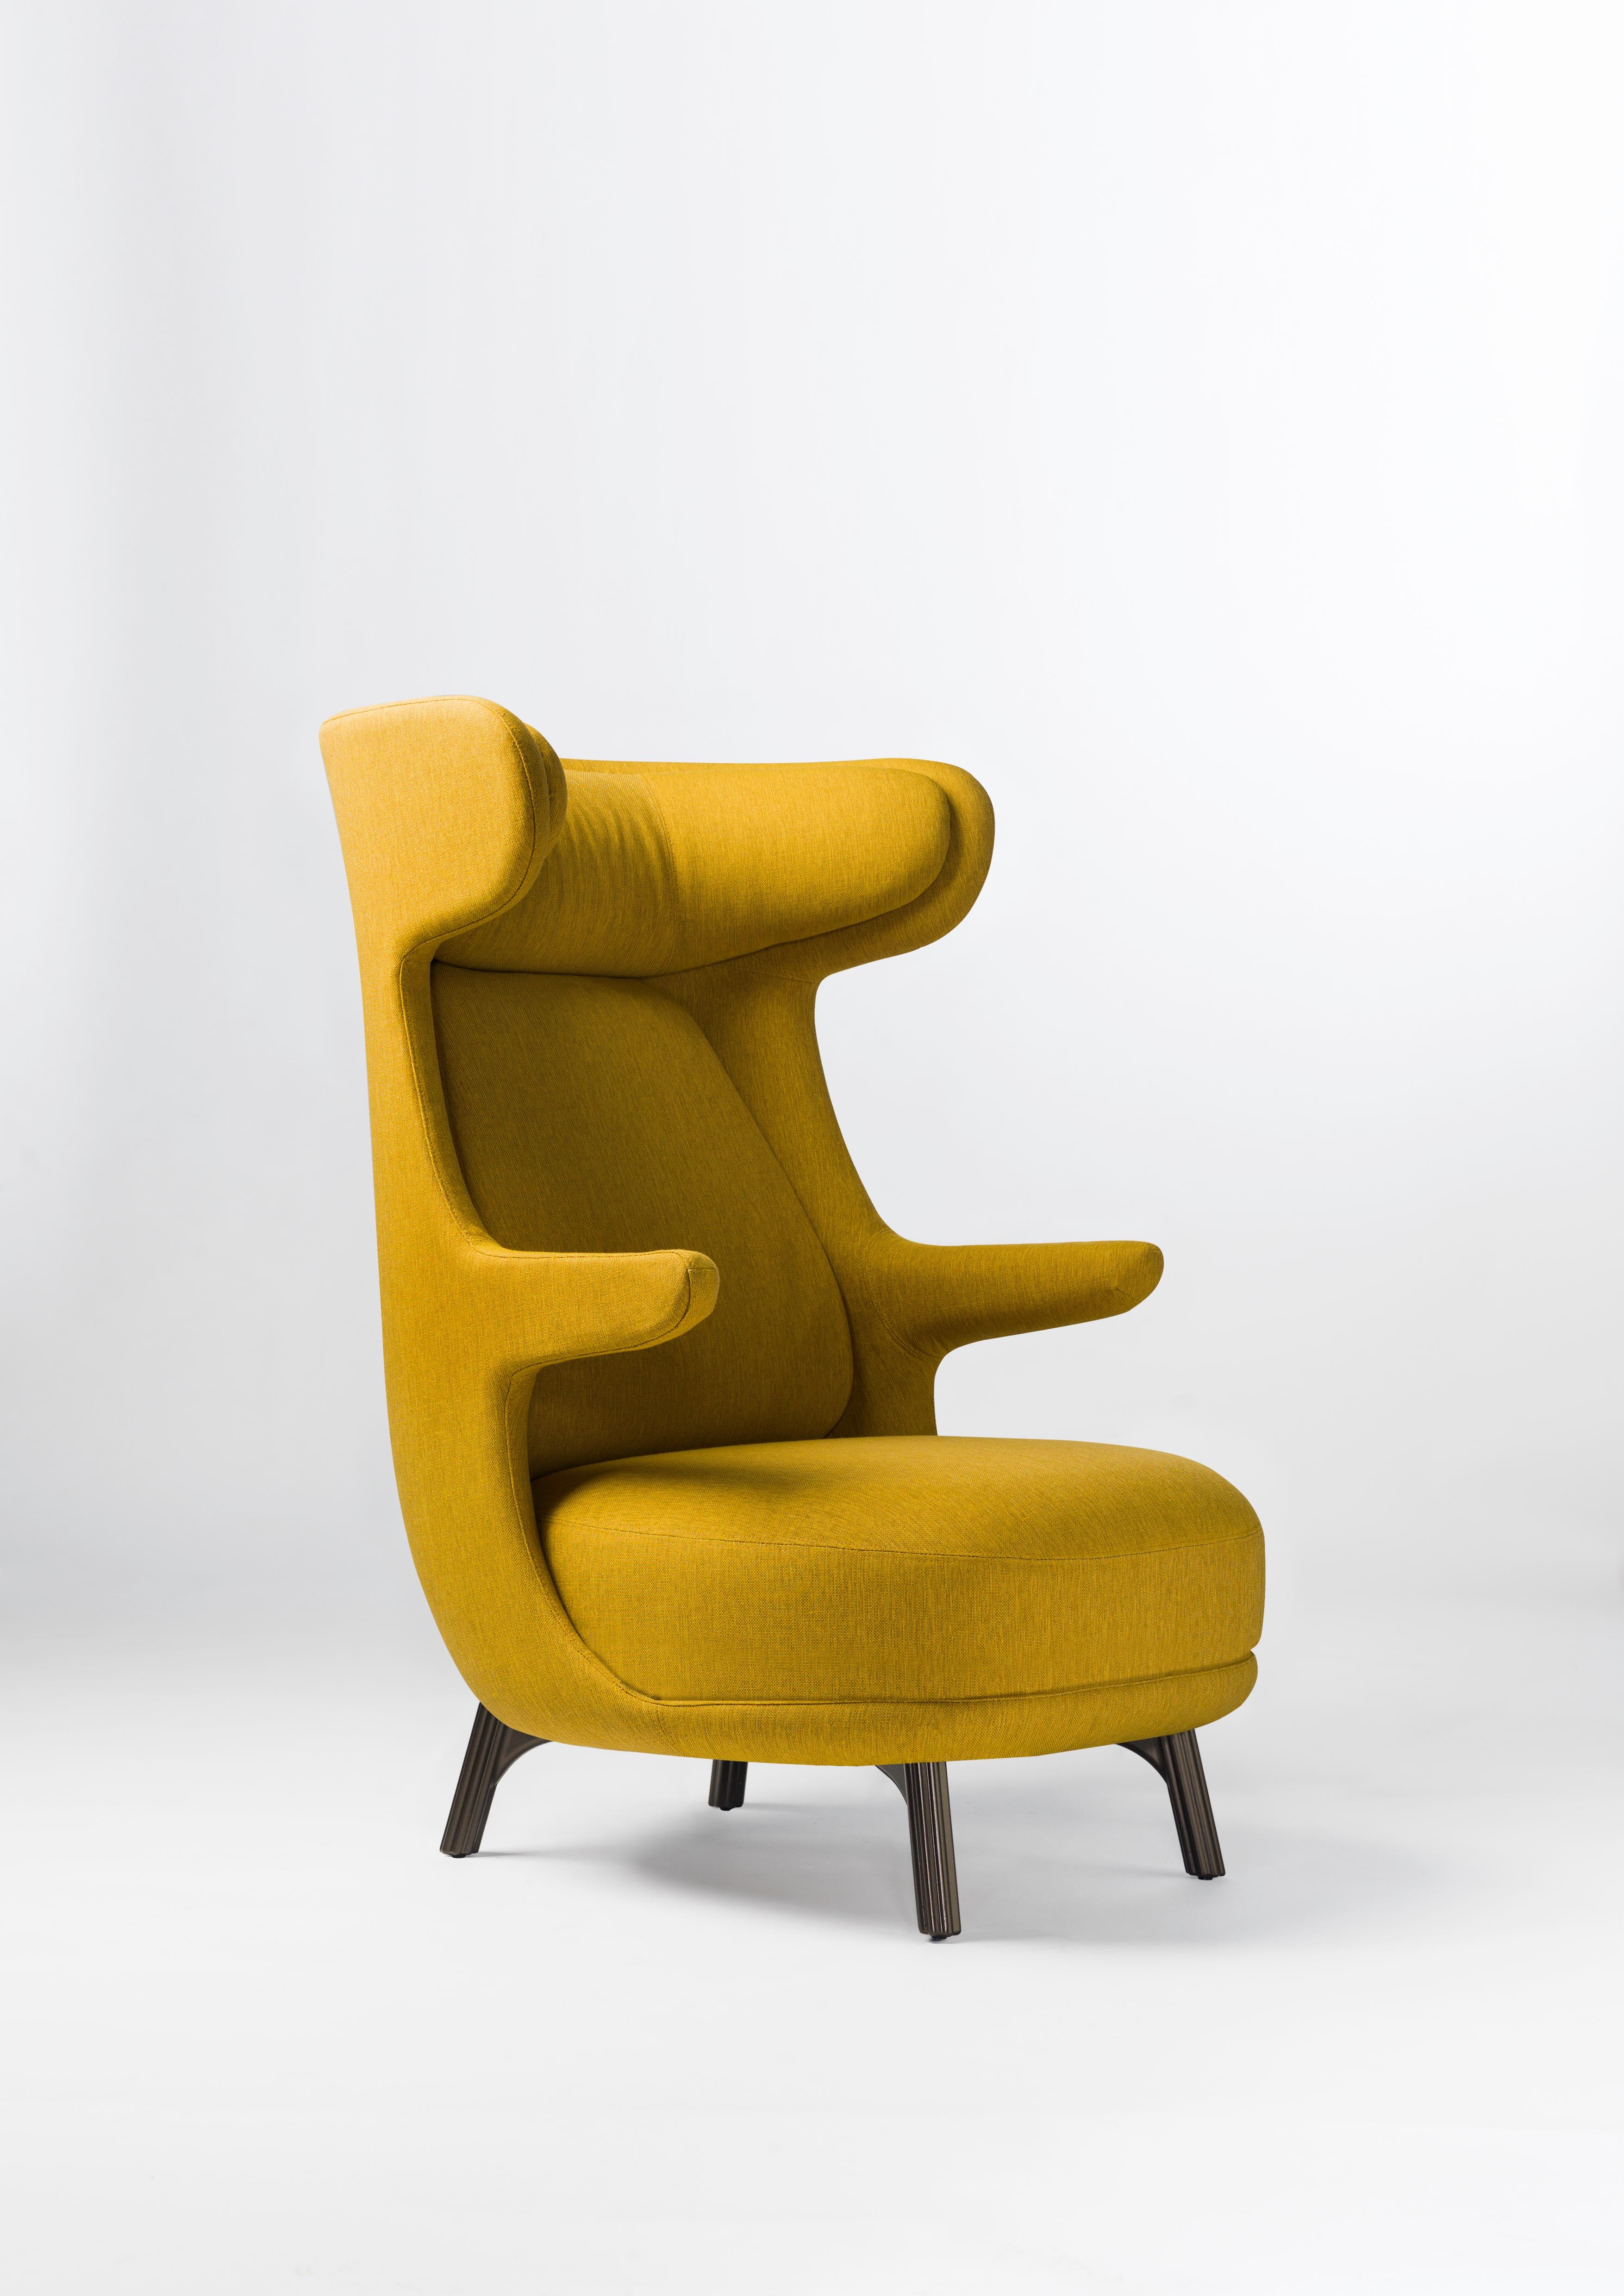 Spanish Hayon Edition Dino Armchair in Fabric and Leather Upholstery by BD Barcelona For Sale